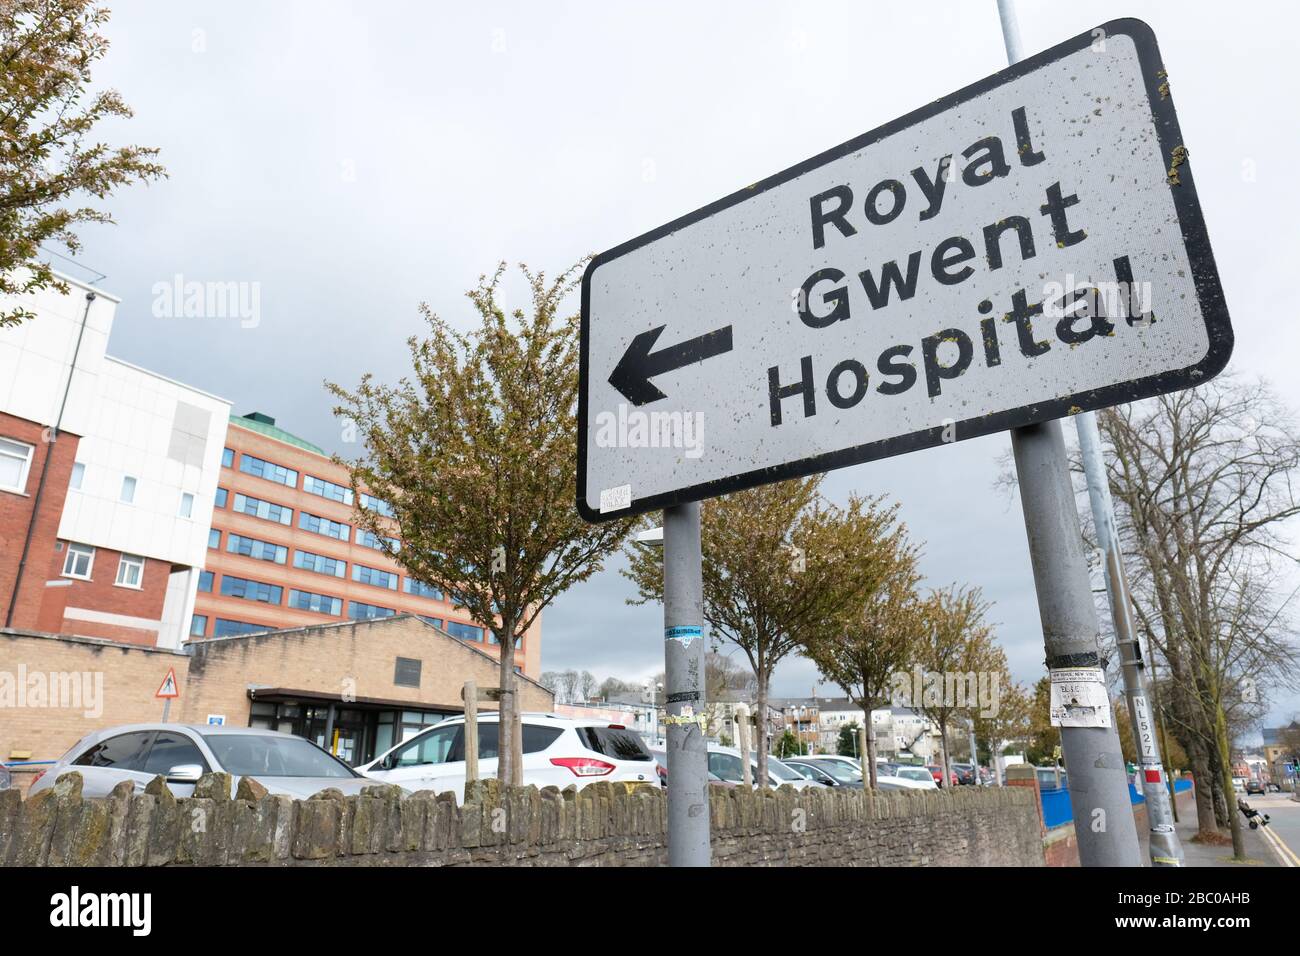 Newport, Gwent, Wales, UK – Thursday 2nd April 2020 – The Royal Gwent Hospital run by the Aneurin Bevan University Health Board ( ABUHB ). As at 1st April 2020 there were 681 confirmed cases of Coronavirus in the ABUHB area, out of a local population of 591,225 making Newport a Coronavirus hotspot.   Photo Steven May / Alamy Live News Stock Photo